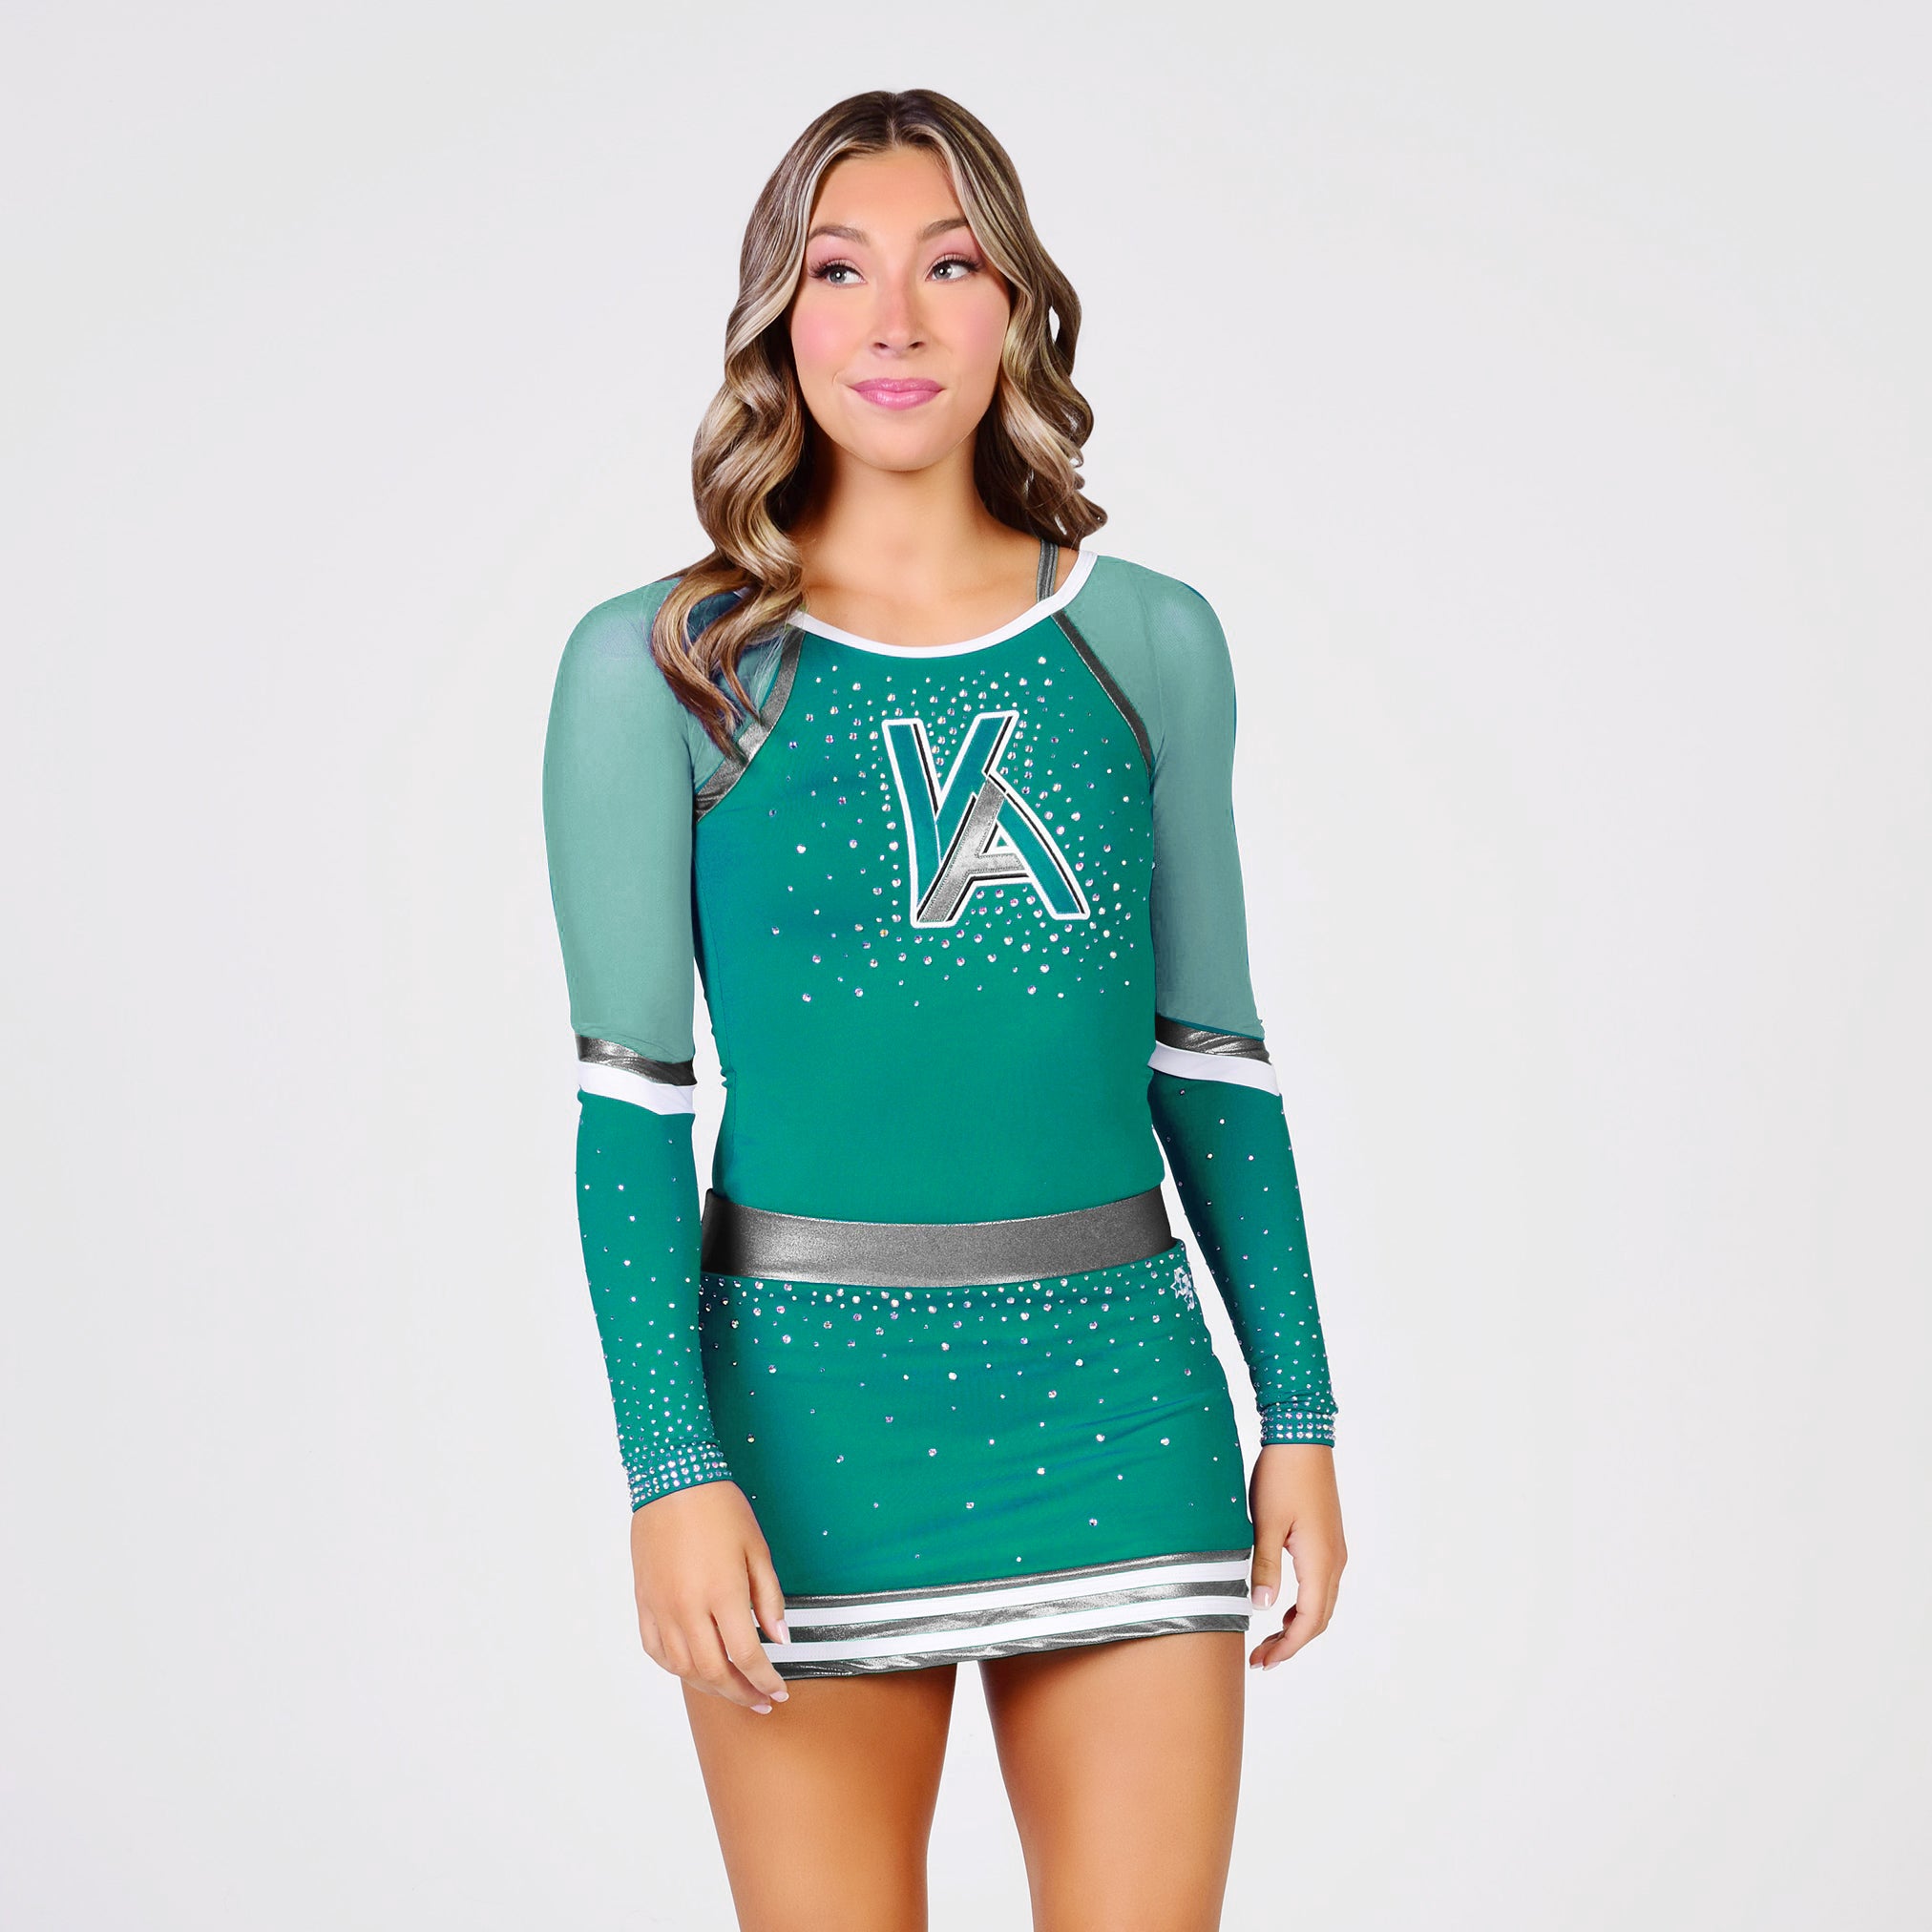 Journey Uniform with Mesh Sleeves - Teal